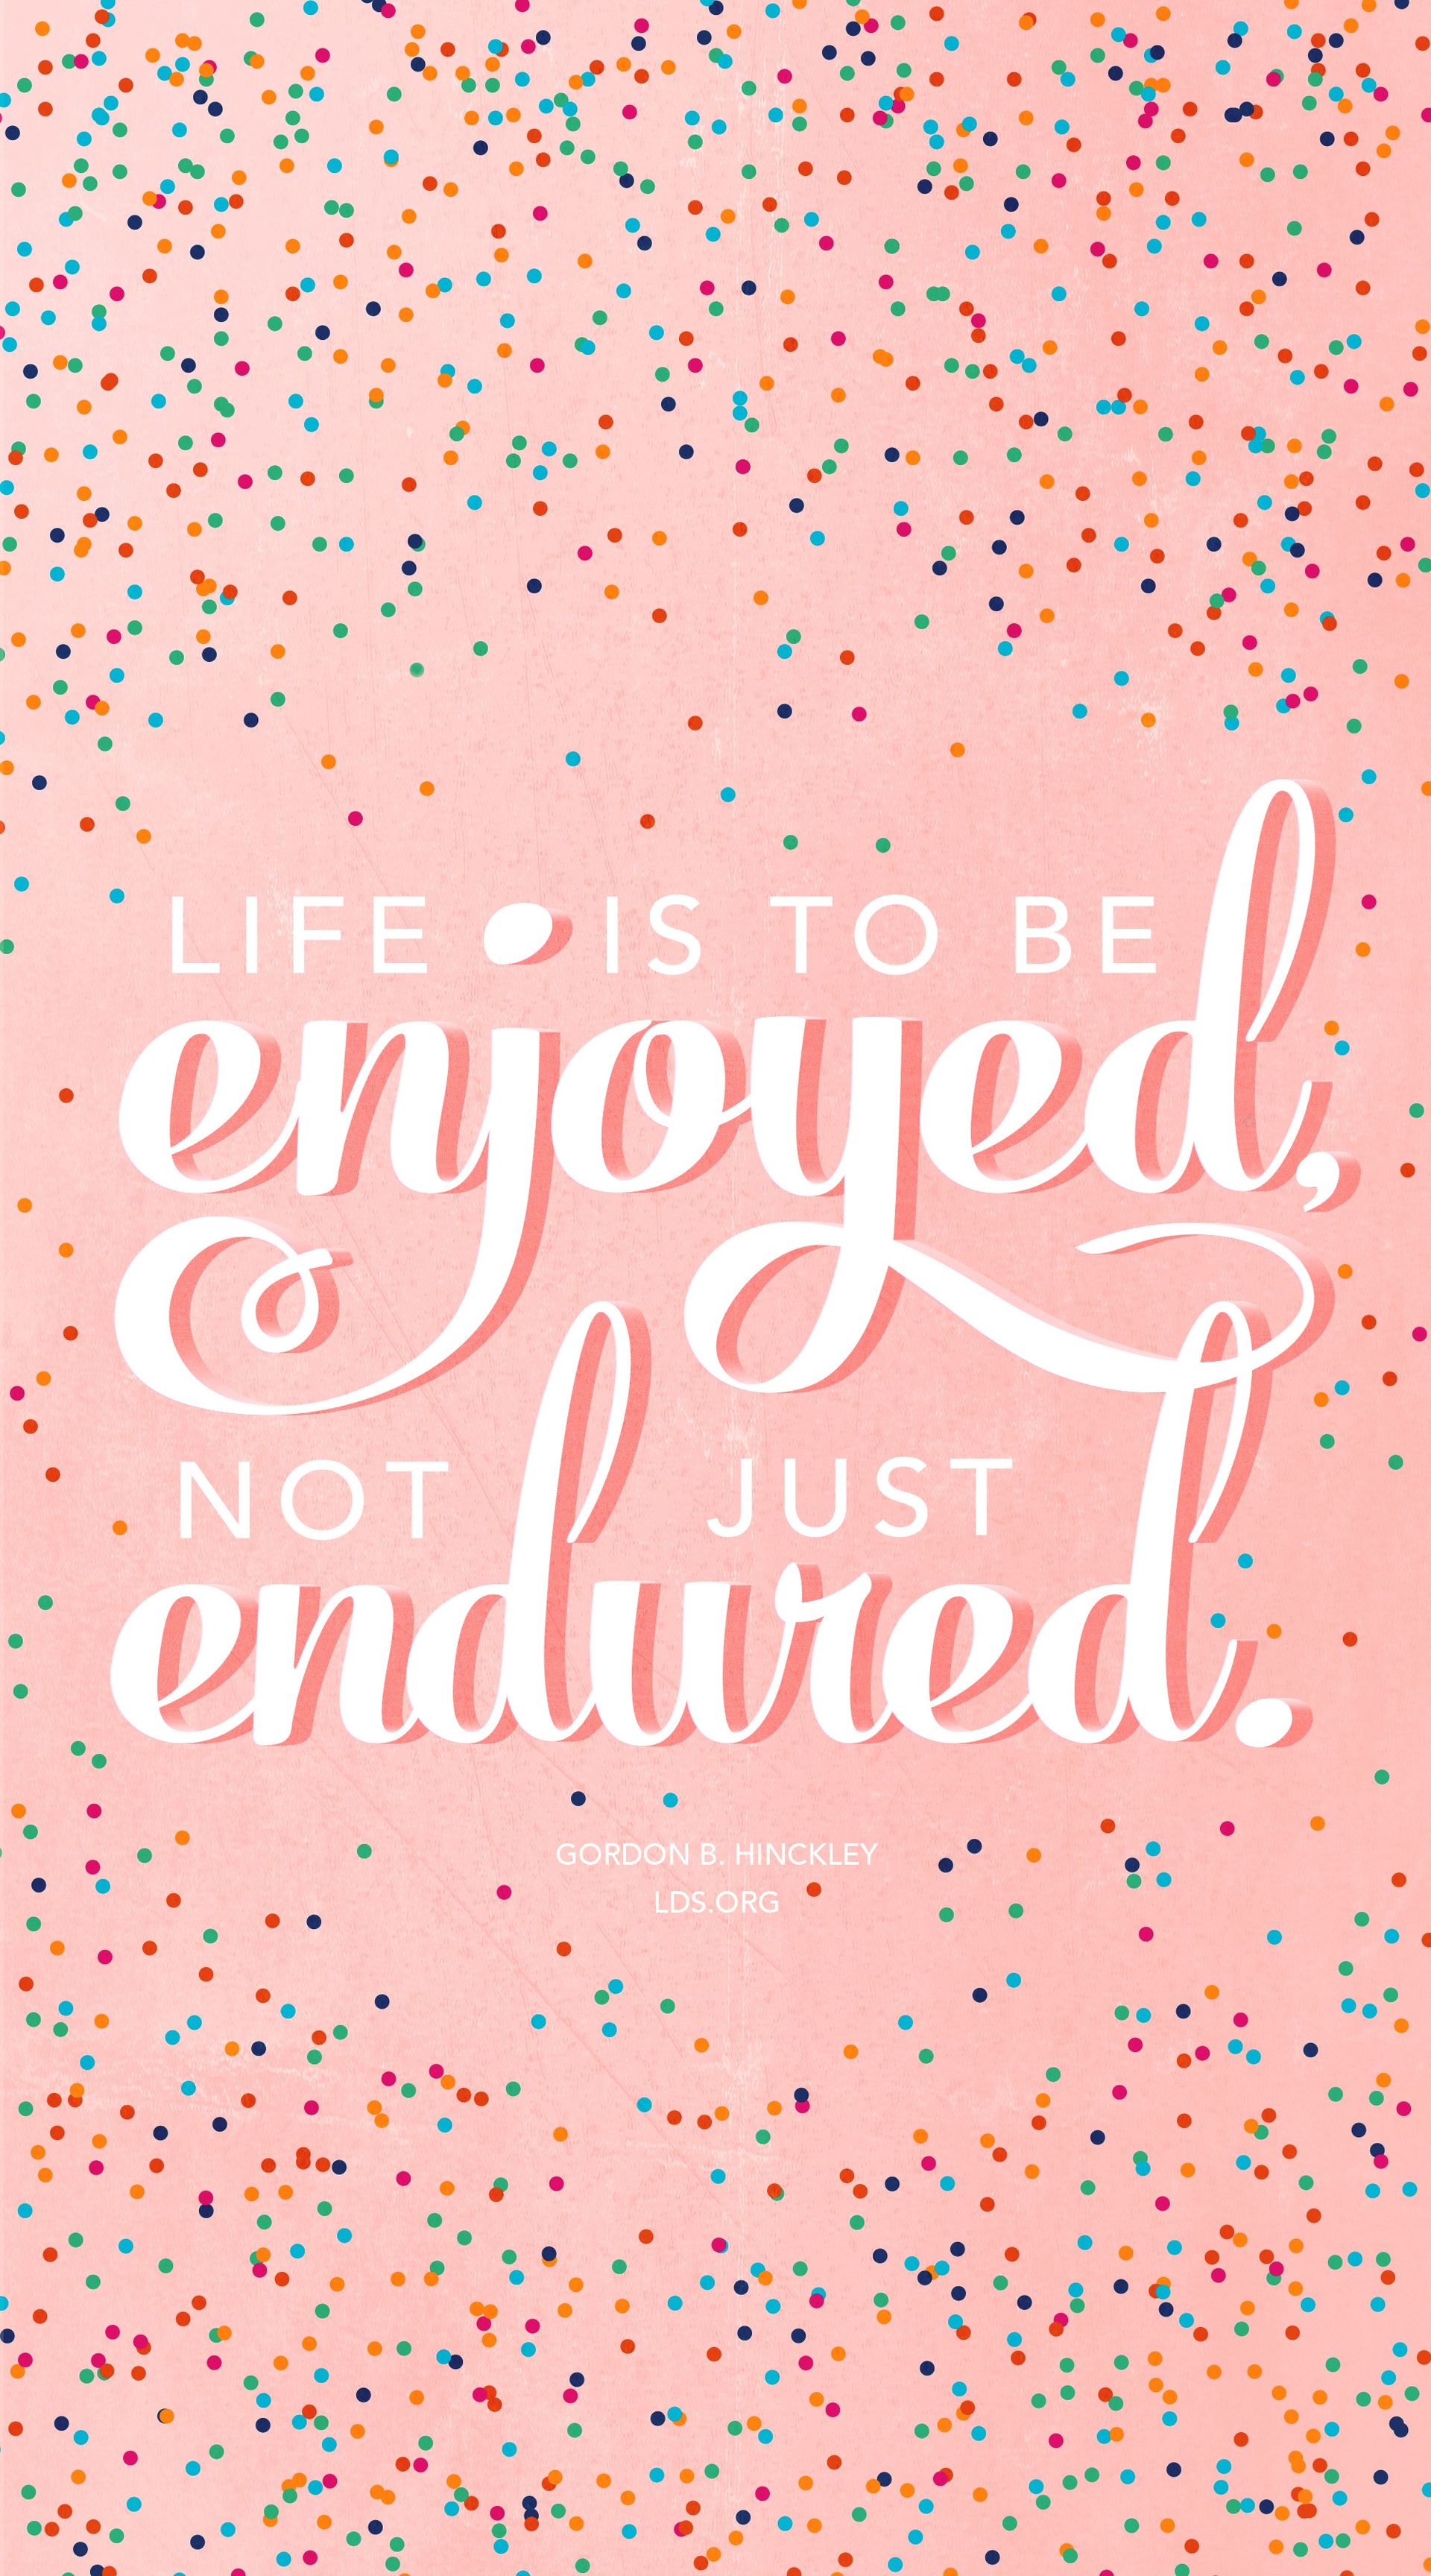 “Life is to be enjoyed, not just endured.” —President Gordon B. Hinckley, “Stand True and Faithful”